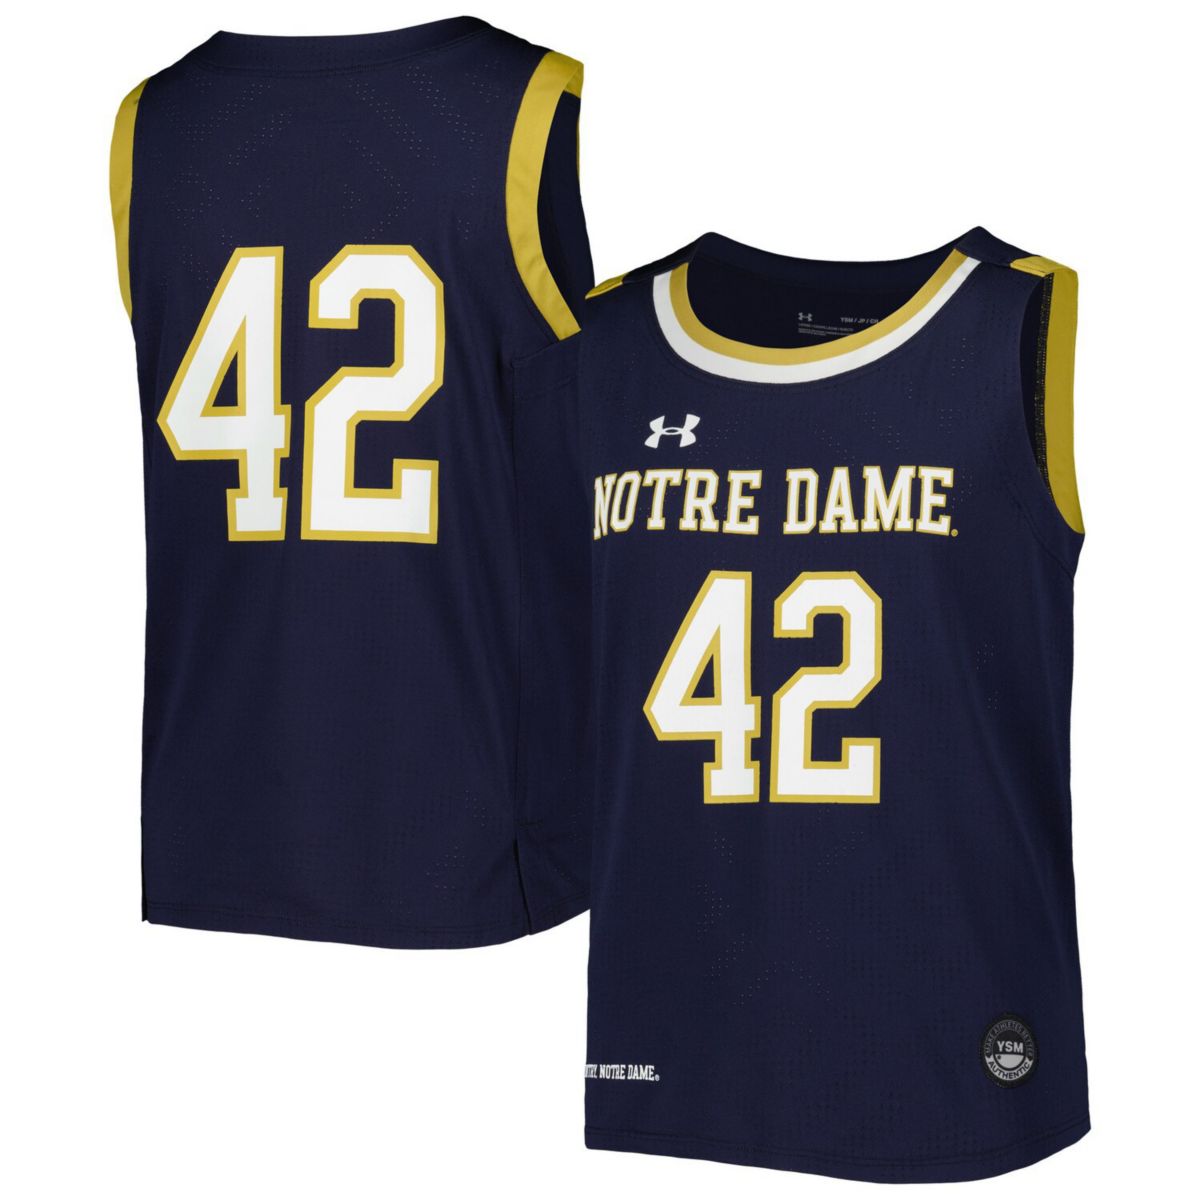 Youth Under Armour #42 Navy Notre Dame Fighting Irish Replica Team Basketball Jersey Under Armour